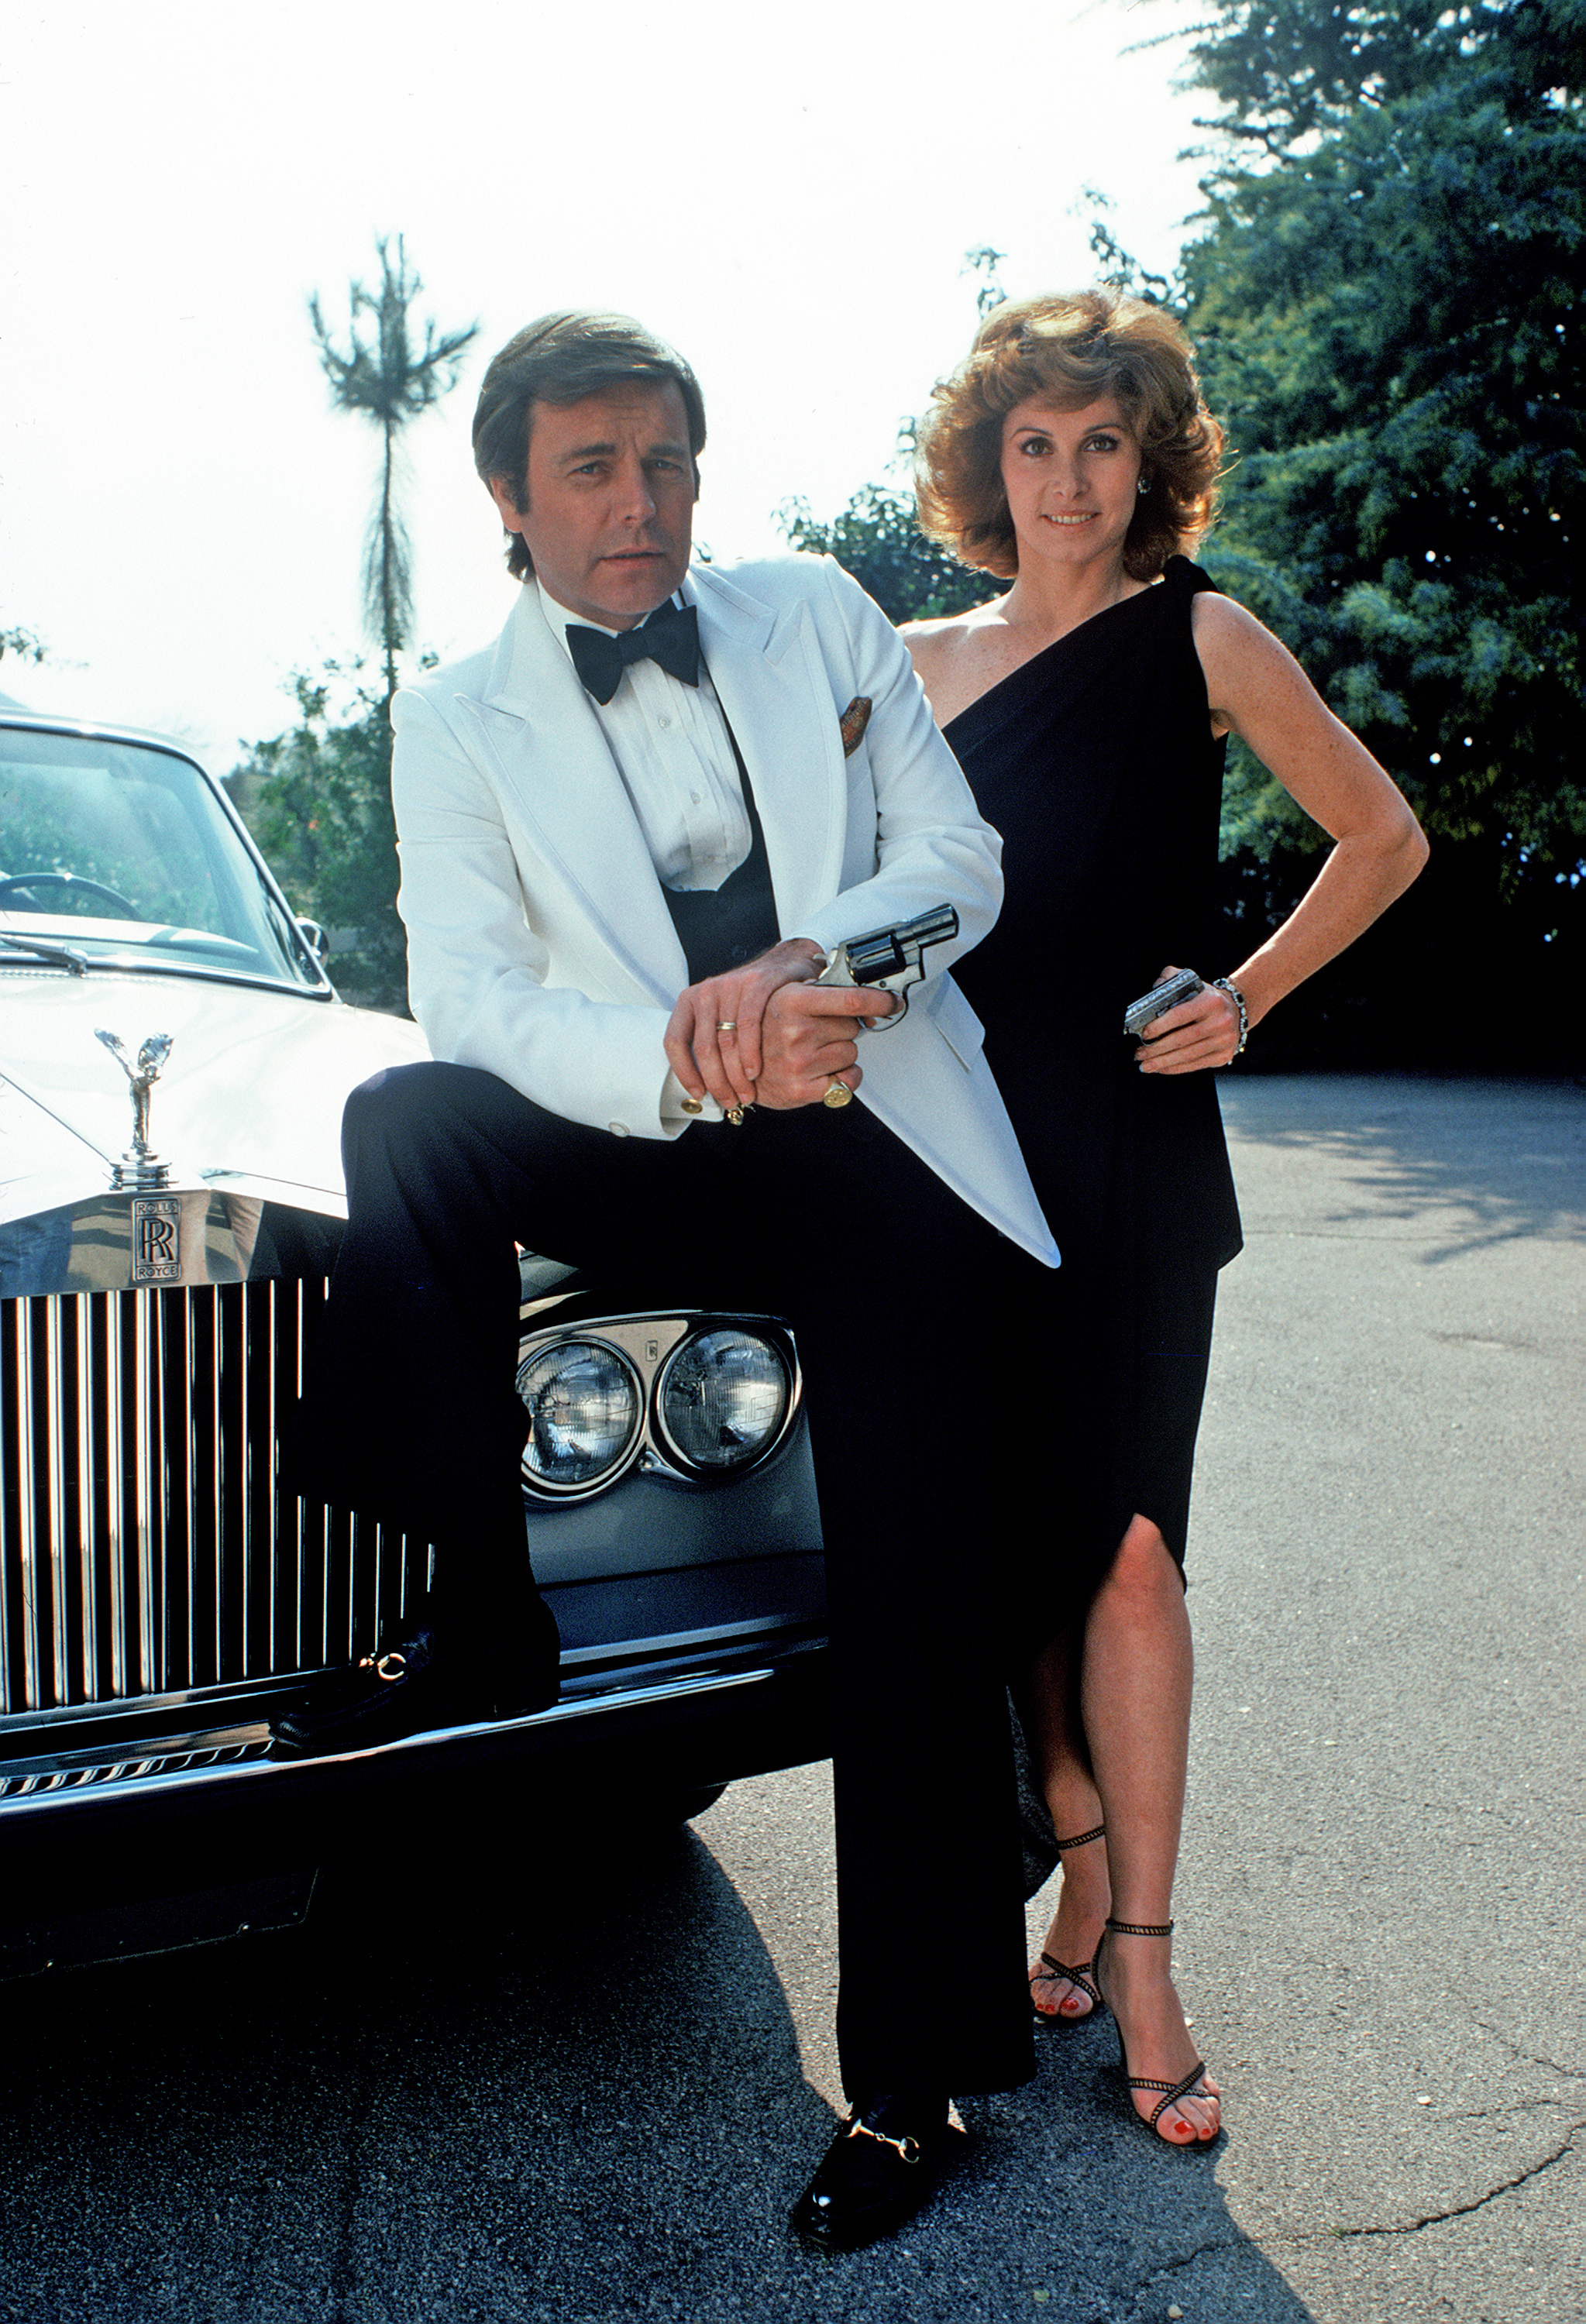 Robert Wagner and Stefanie Powers in "Hart to Hart" on August 25, 1979 | Source: Getty Images